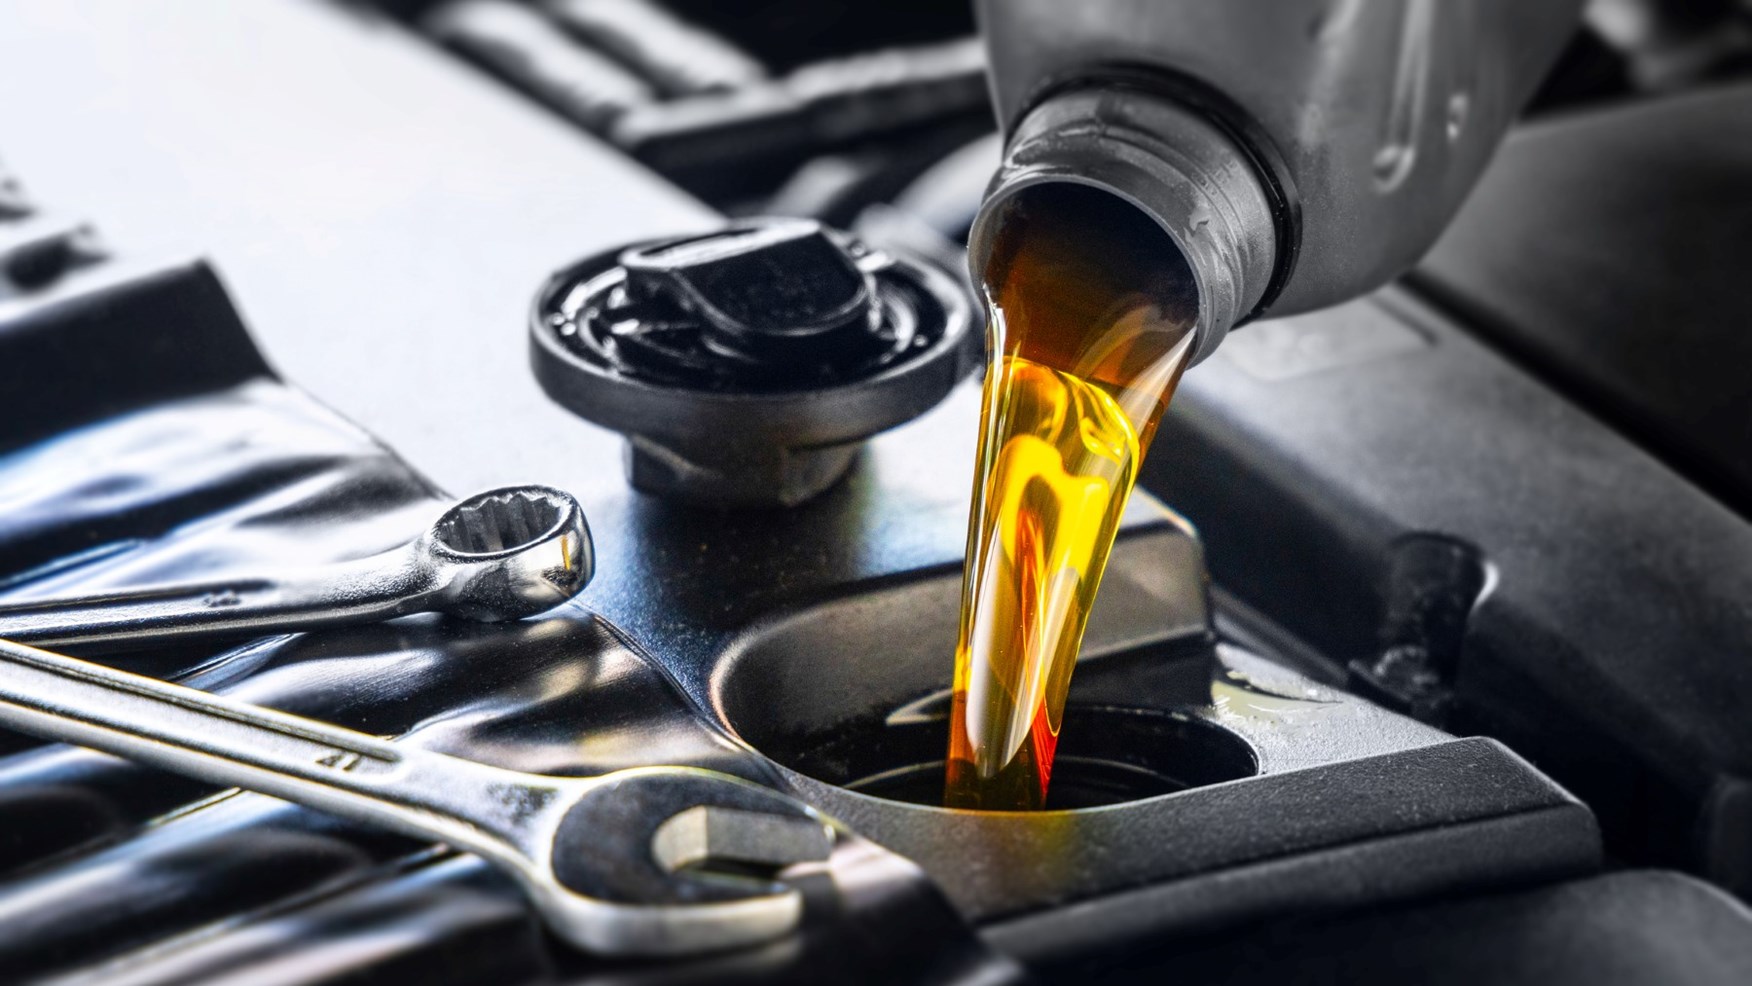 gettyimages adding engine oil - What To Minimally Check When Inspecting Your Car’s Engine